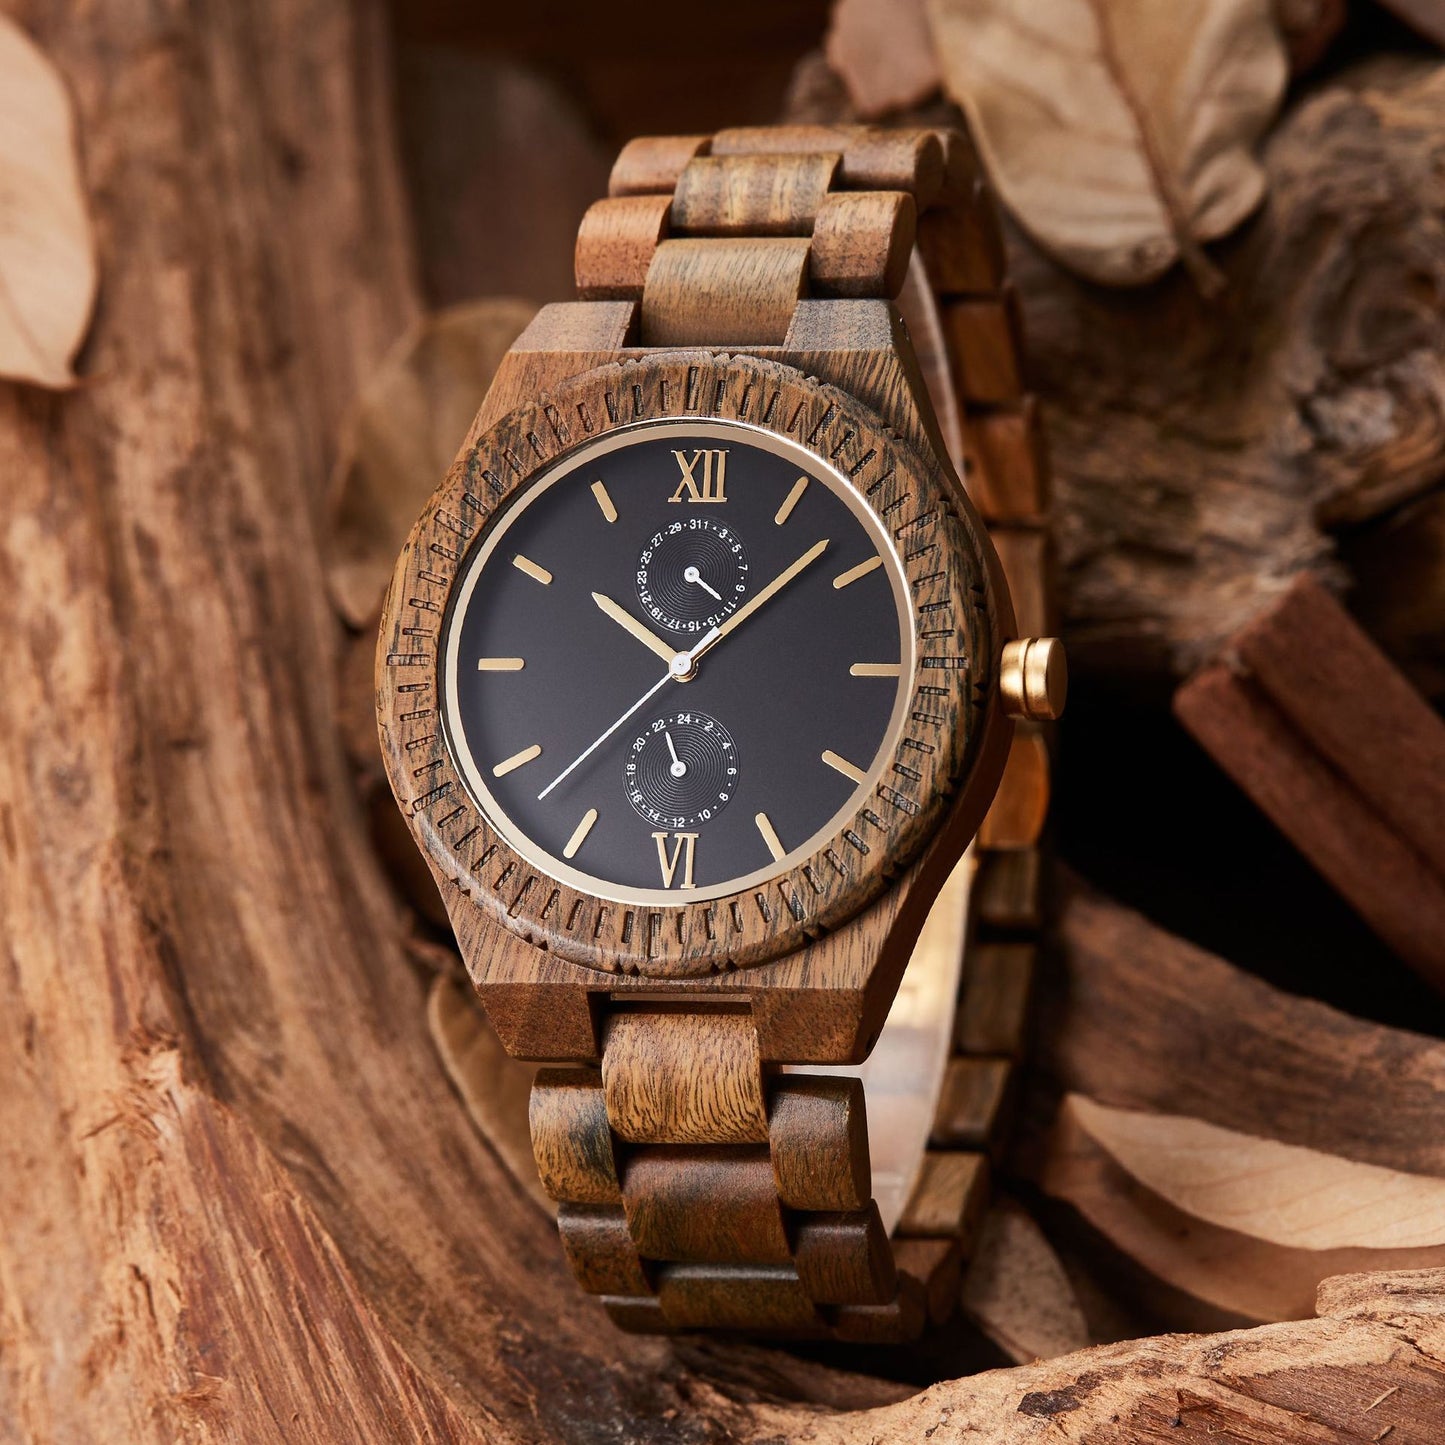 Mens Wooden Watch with Custom Engraving